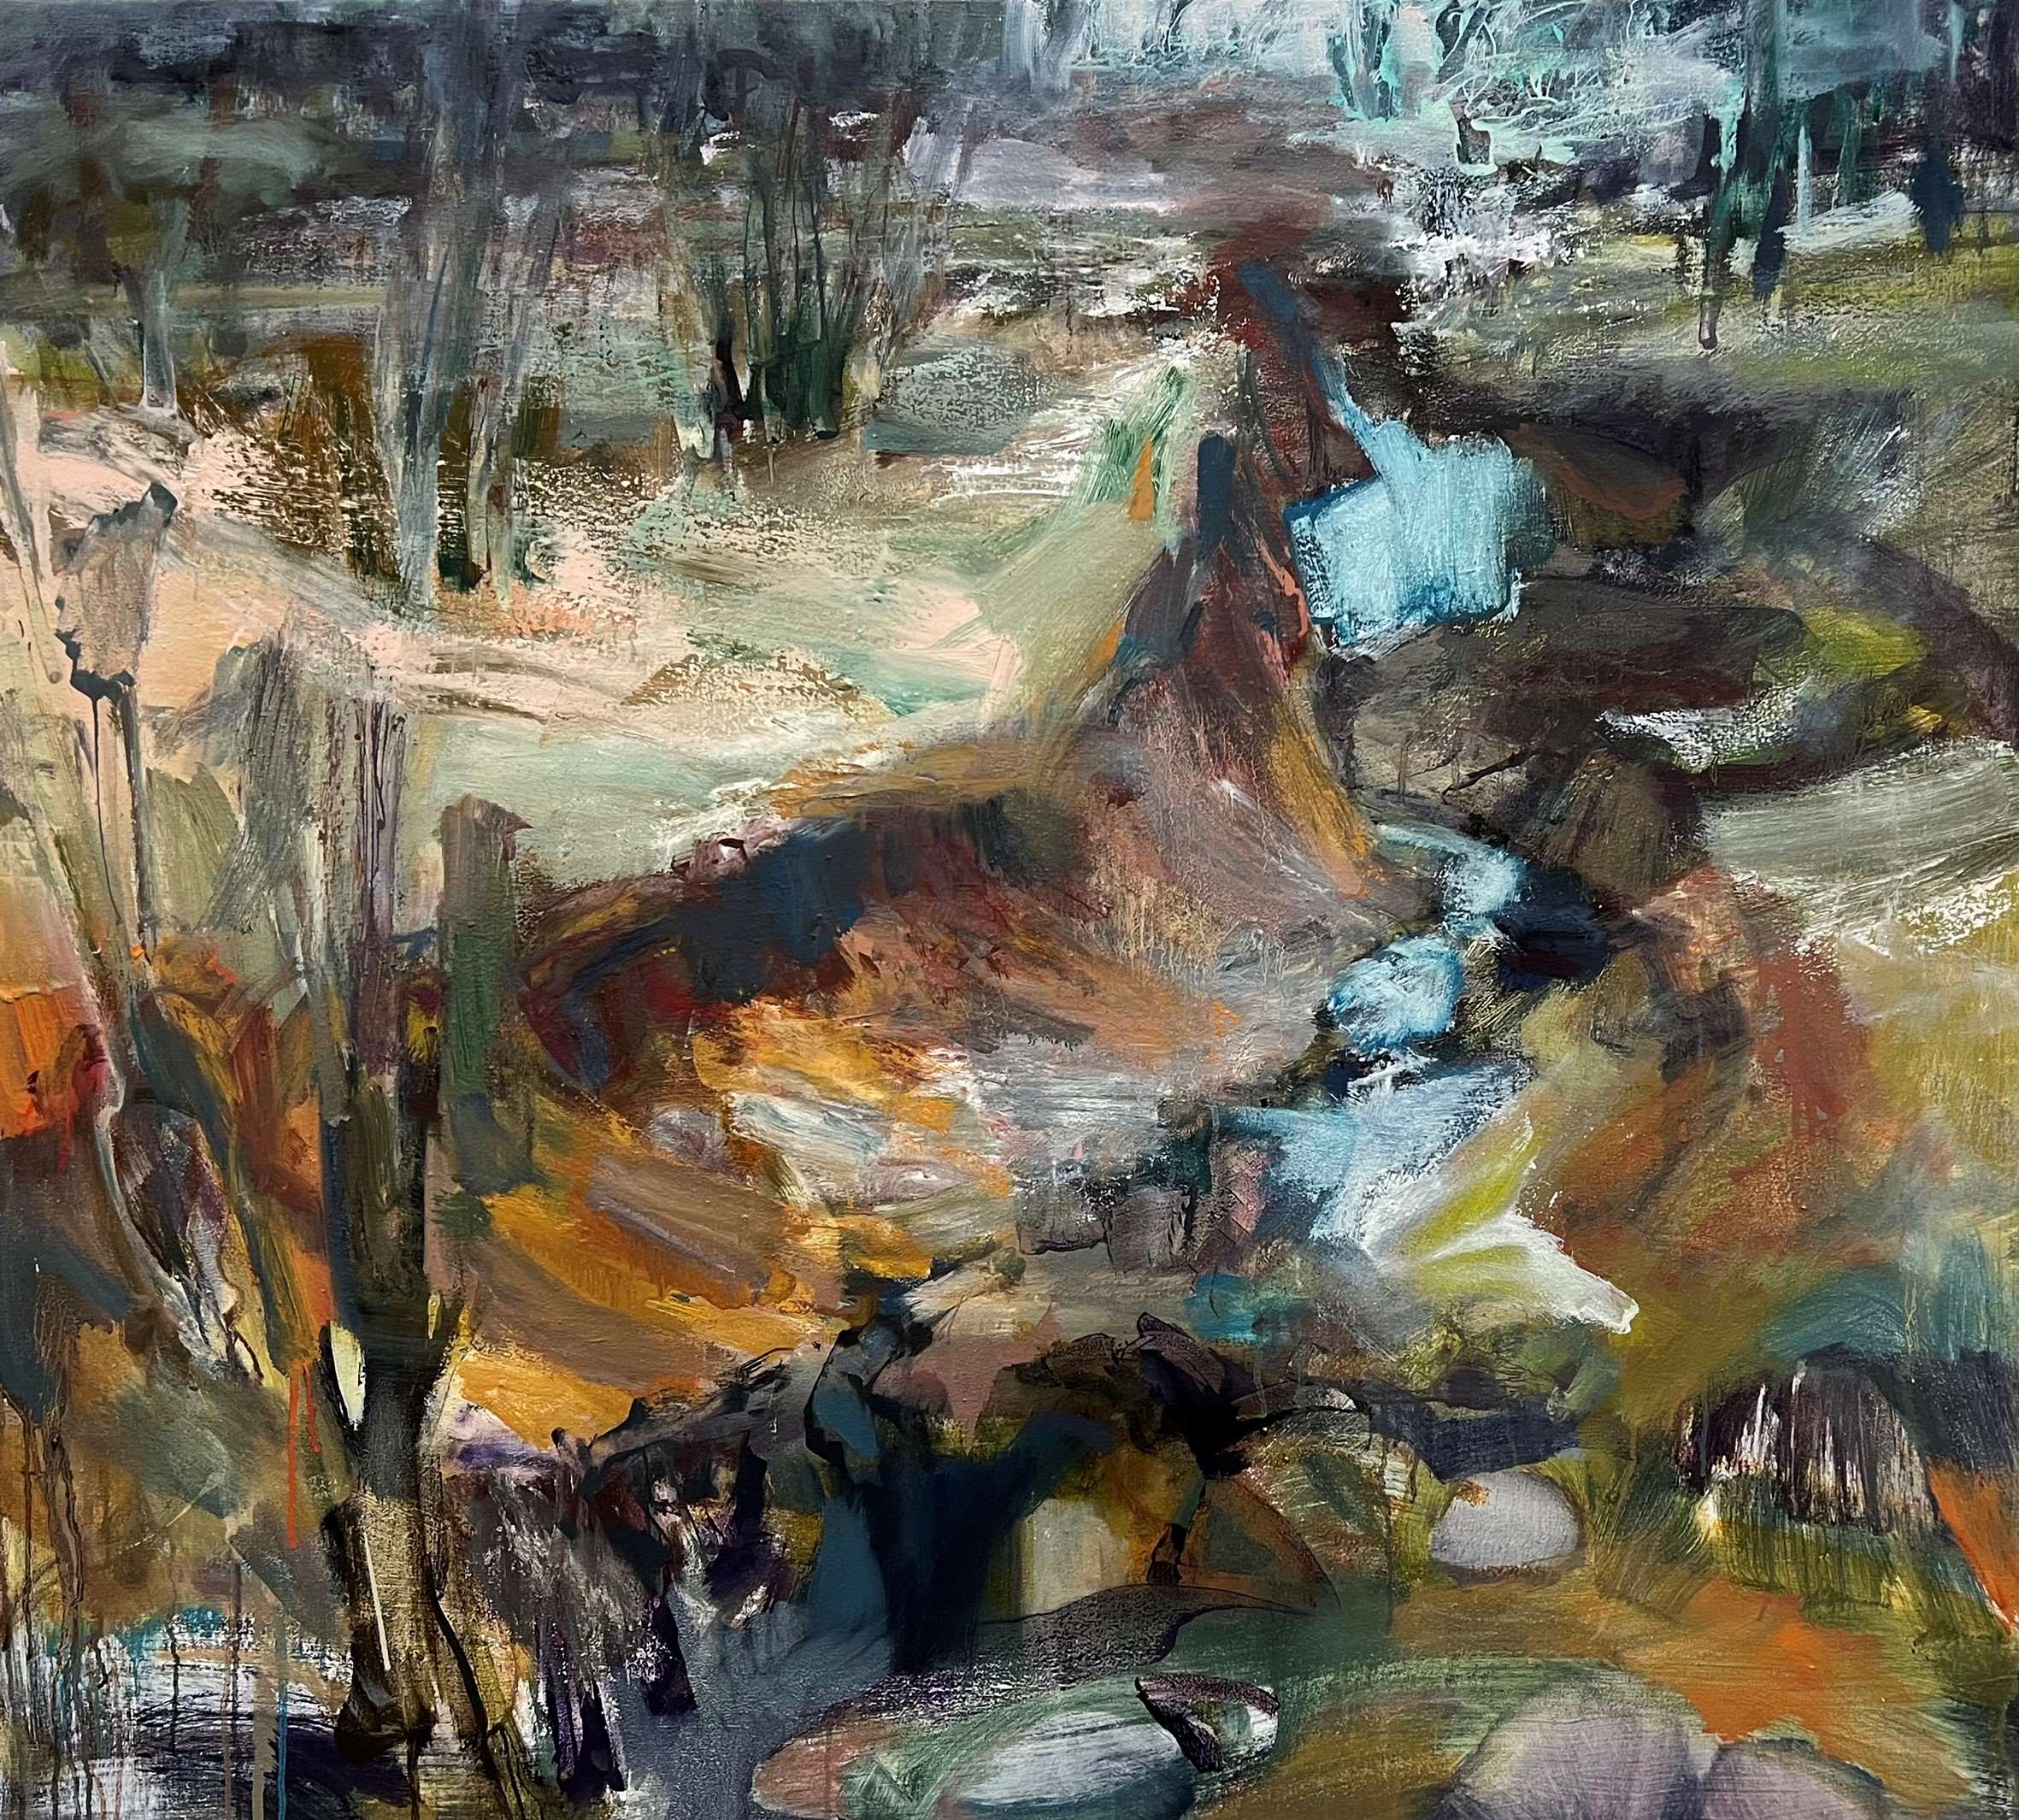 Kerry McInnis 'Cold Creek' oil on canvas 92 x 102cm $9,000 SOLD